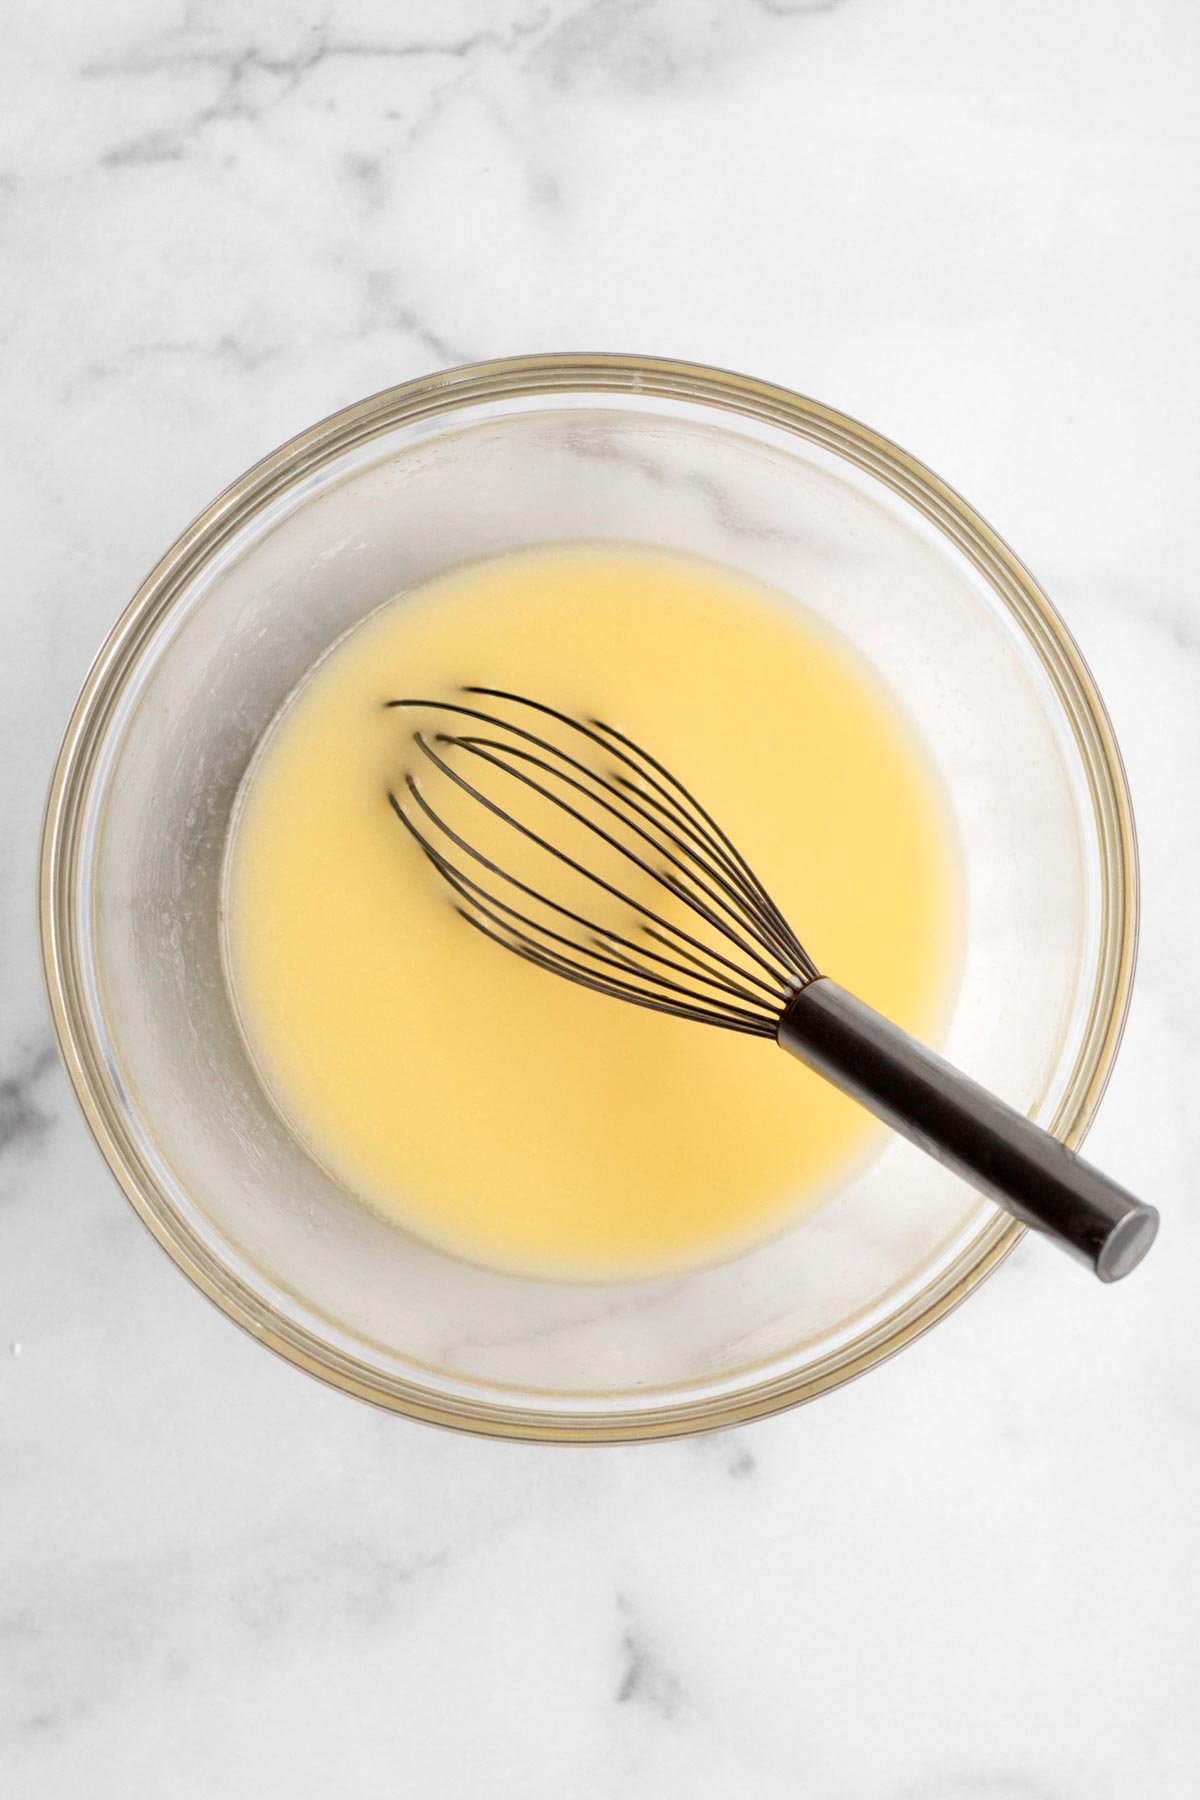 A glass bowl with melted butter.